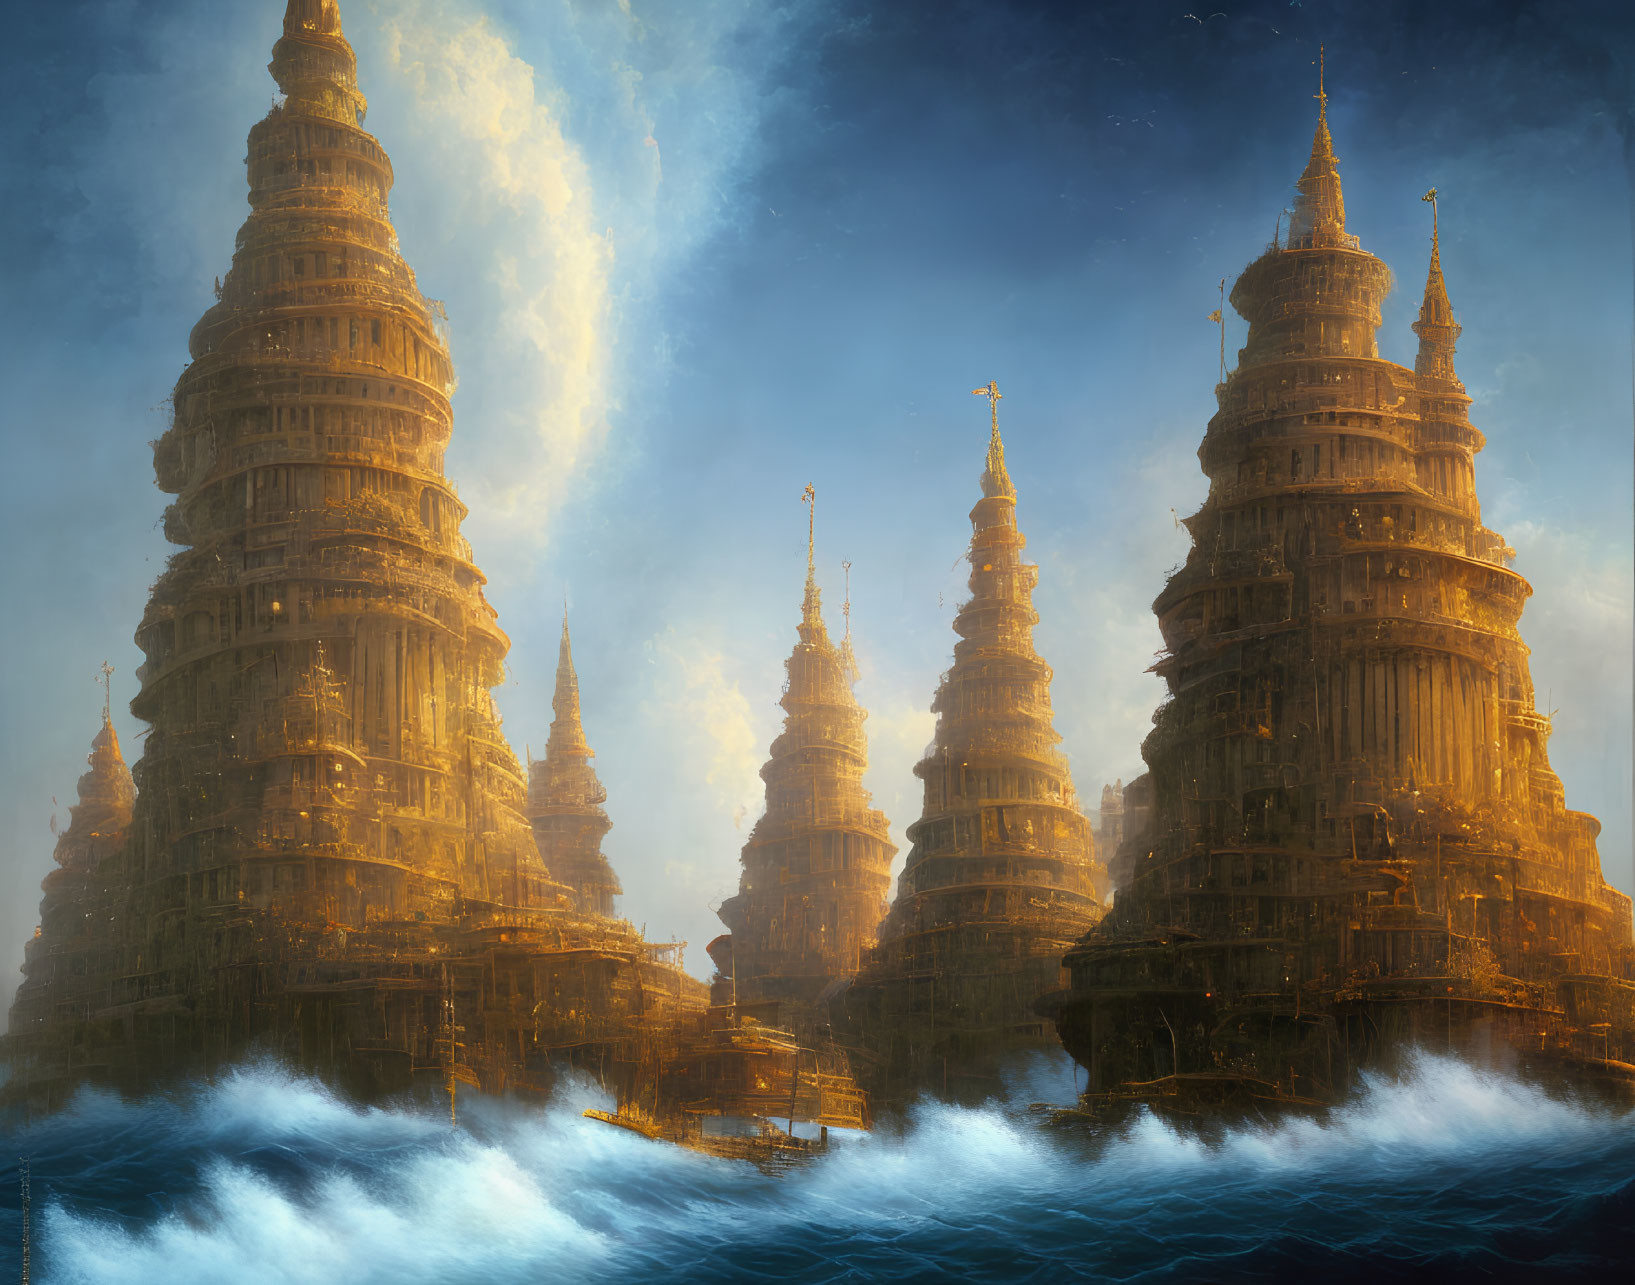 Golden Towers Emerge from Turbulent Ocean Under Dramatic Sky